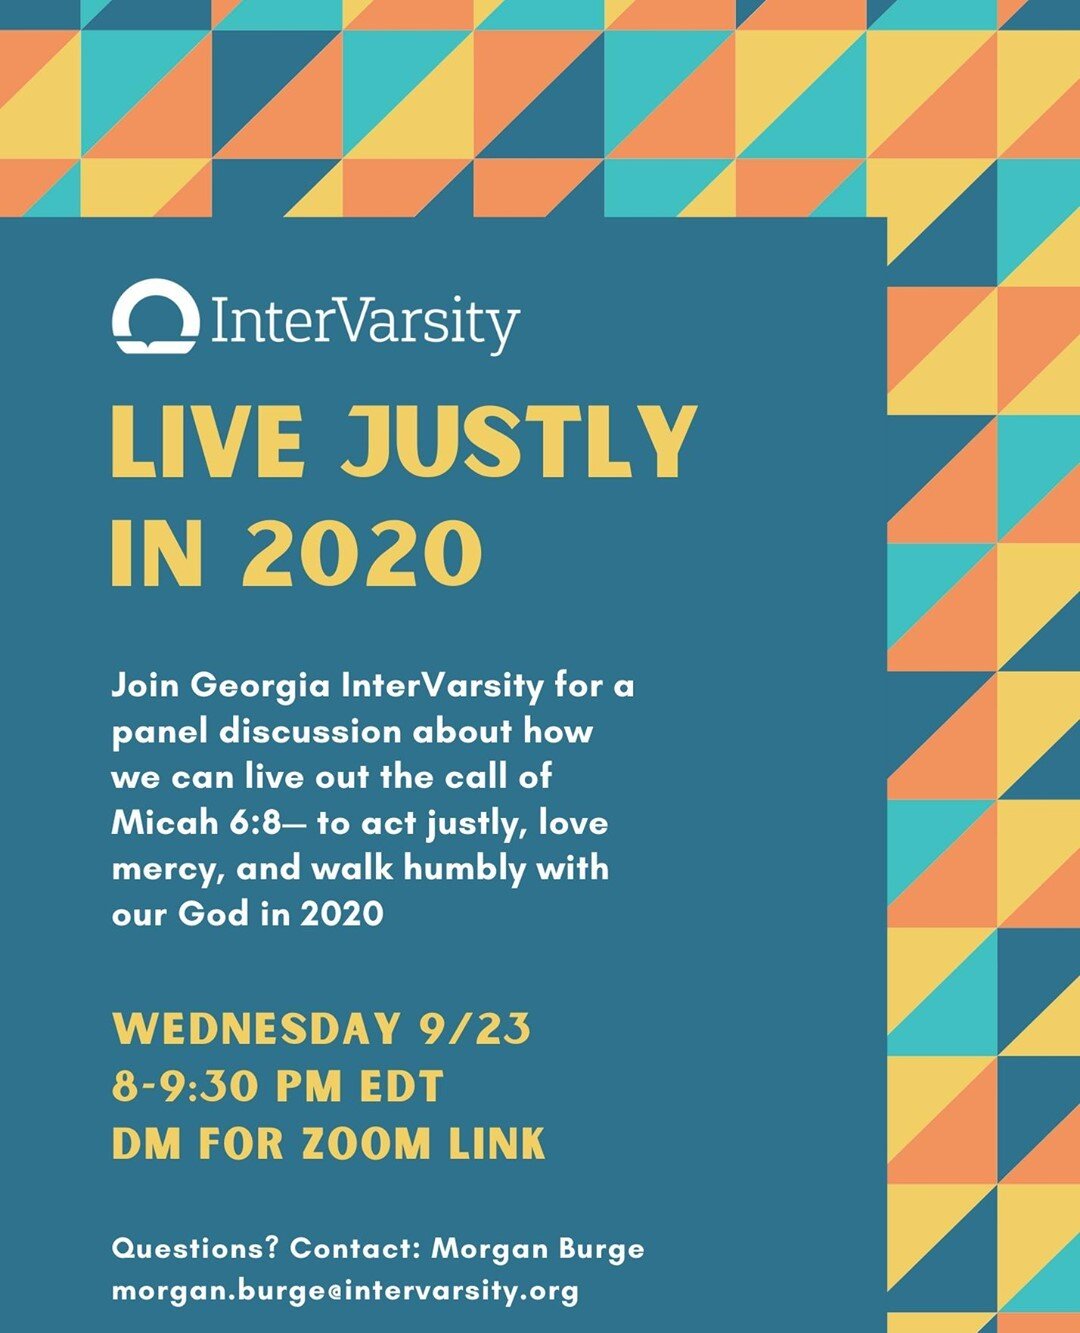 Join us for our Live Justly in 2020 panel on Wednesday 9/23 from 8-9:30pm ET! In this discussion we will dive into the issues of local advocacy, education, and housing justice.⁠
⁠
You will walk away with practical ways to live out the call of Micah 6